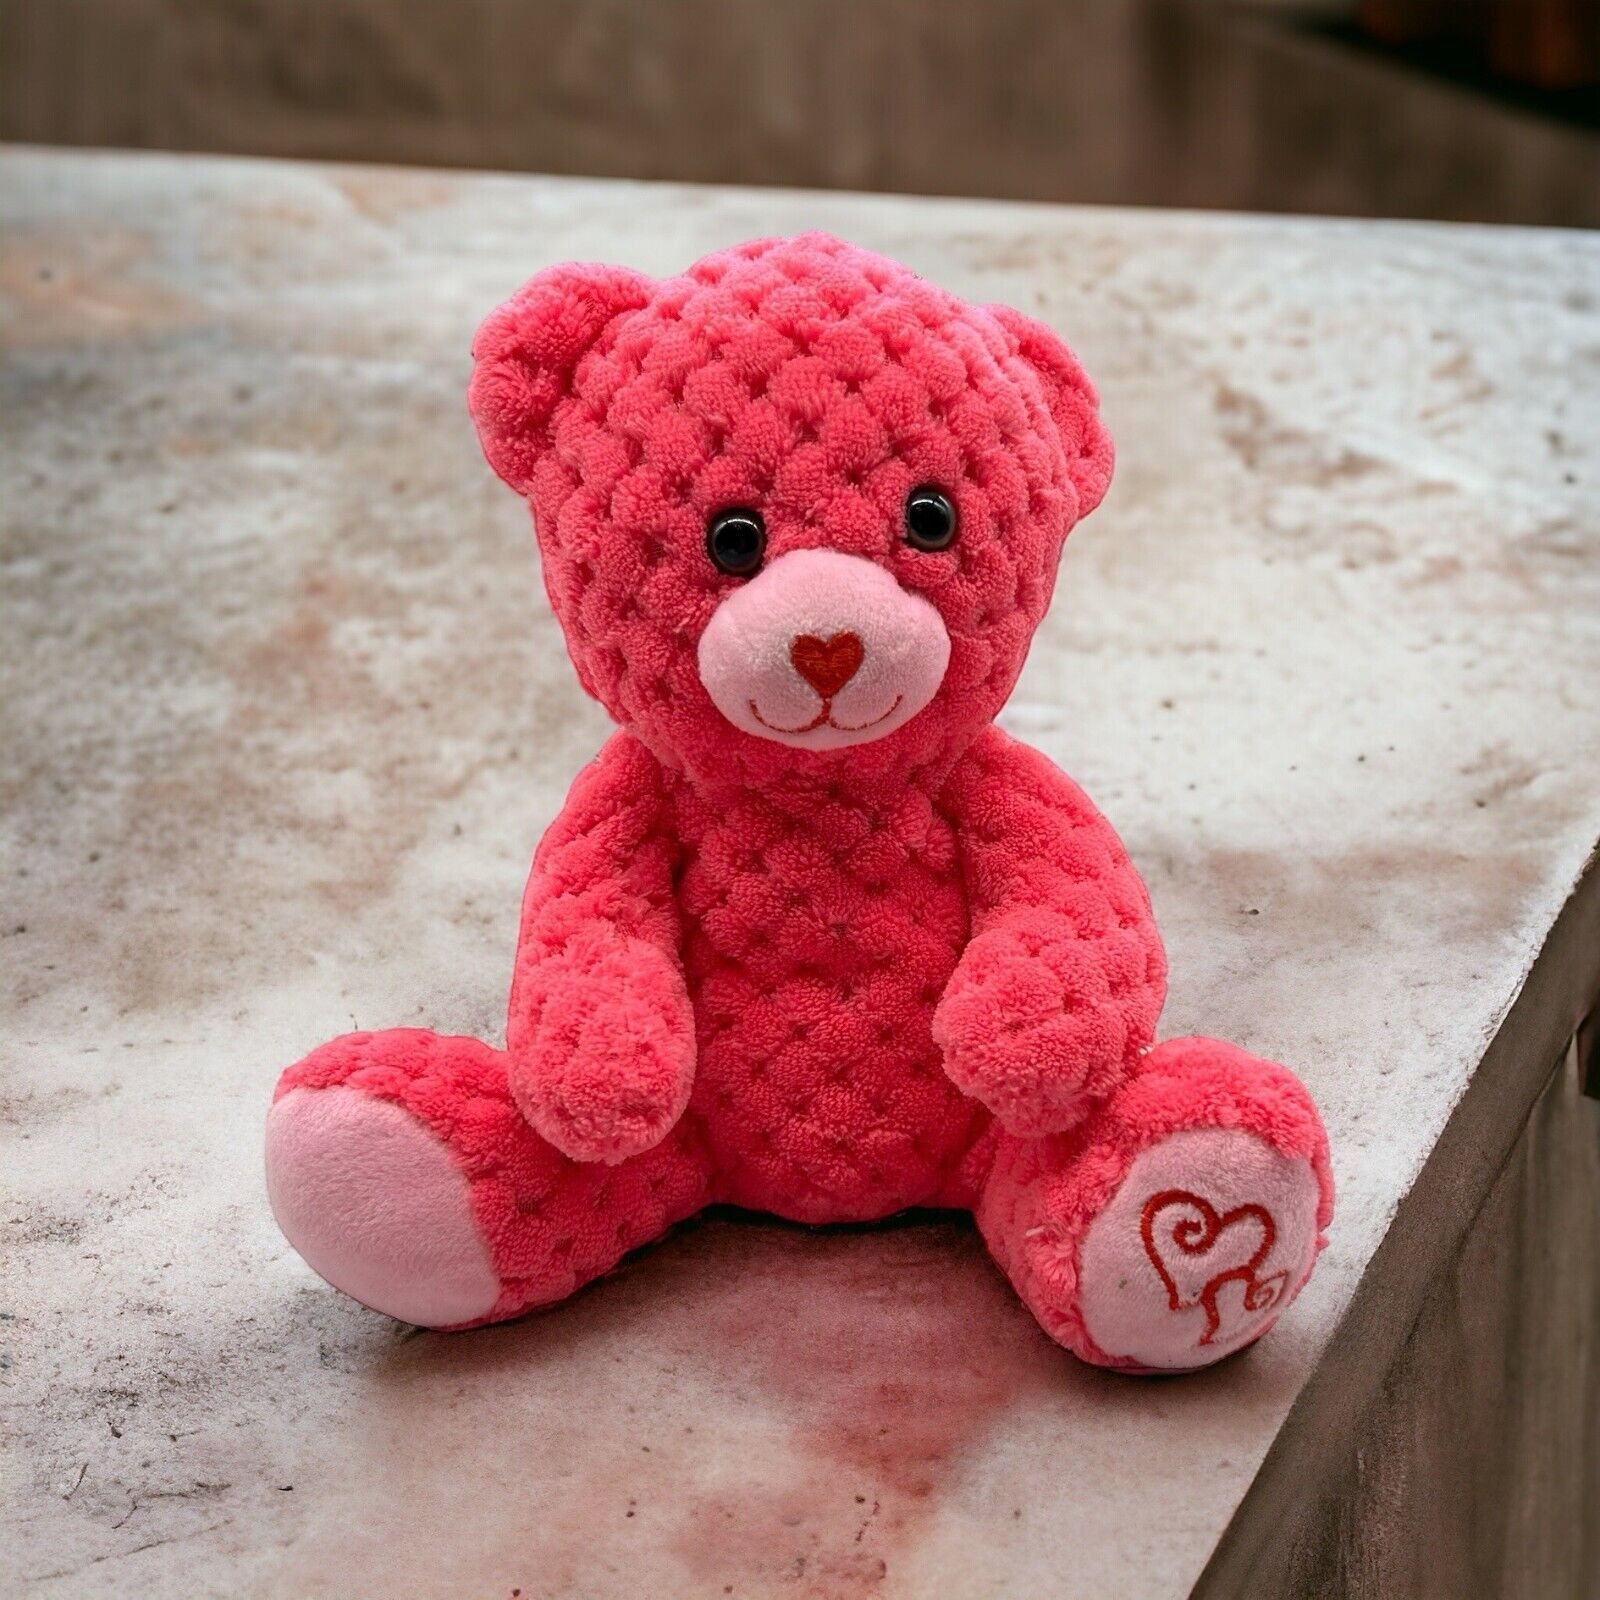 Inter-American Valentines Day Quilted Look 8" Pink Teddy Bear Heart Foot Love - $9.49